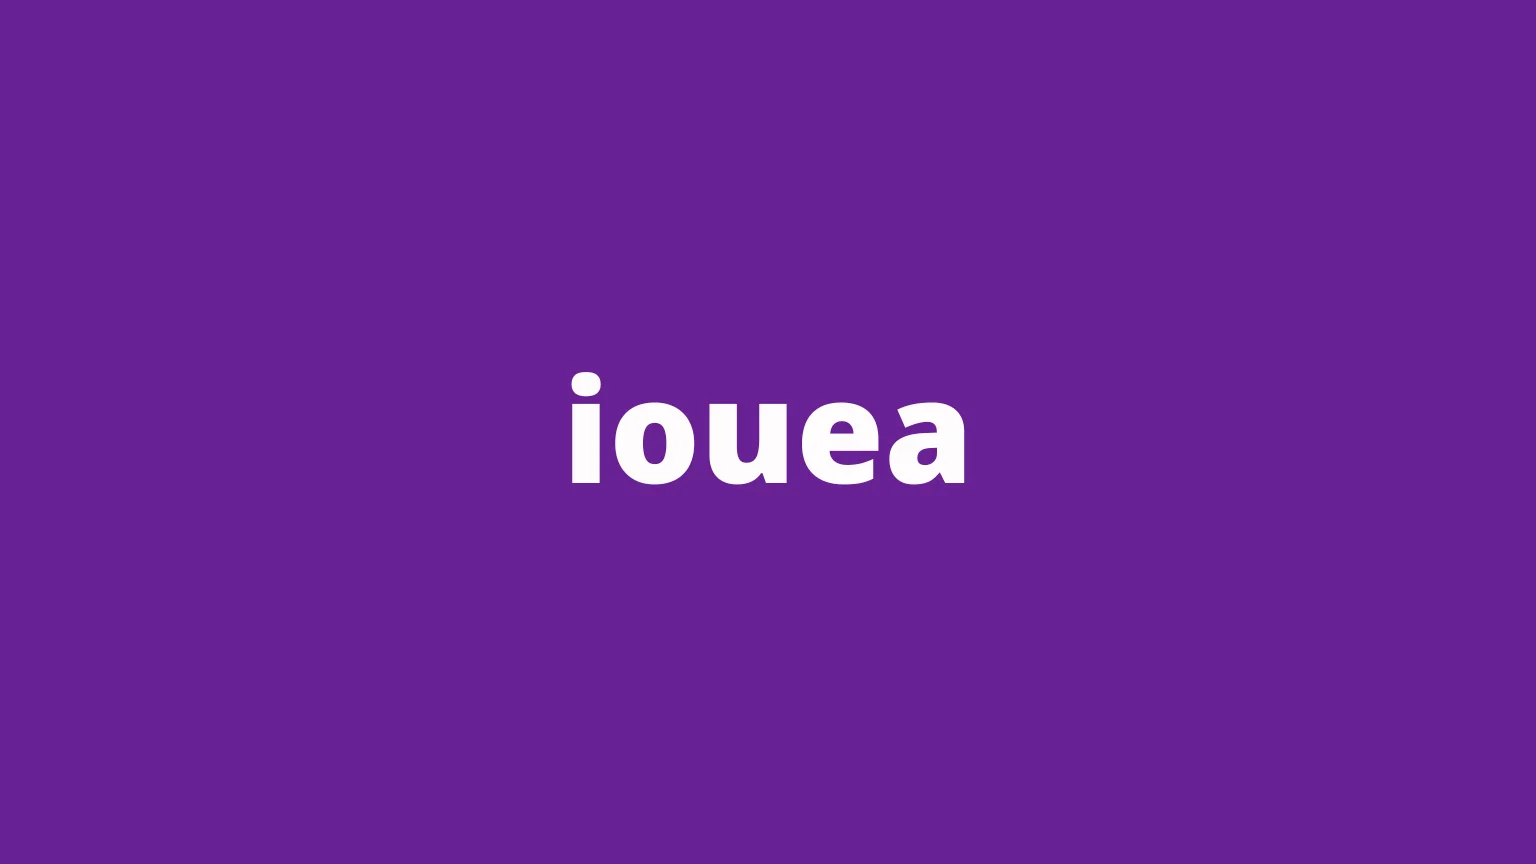 The word iouea and its meaning